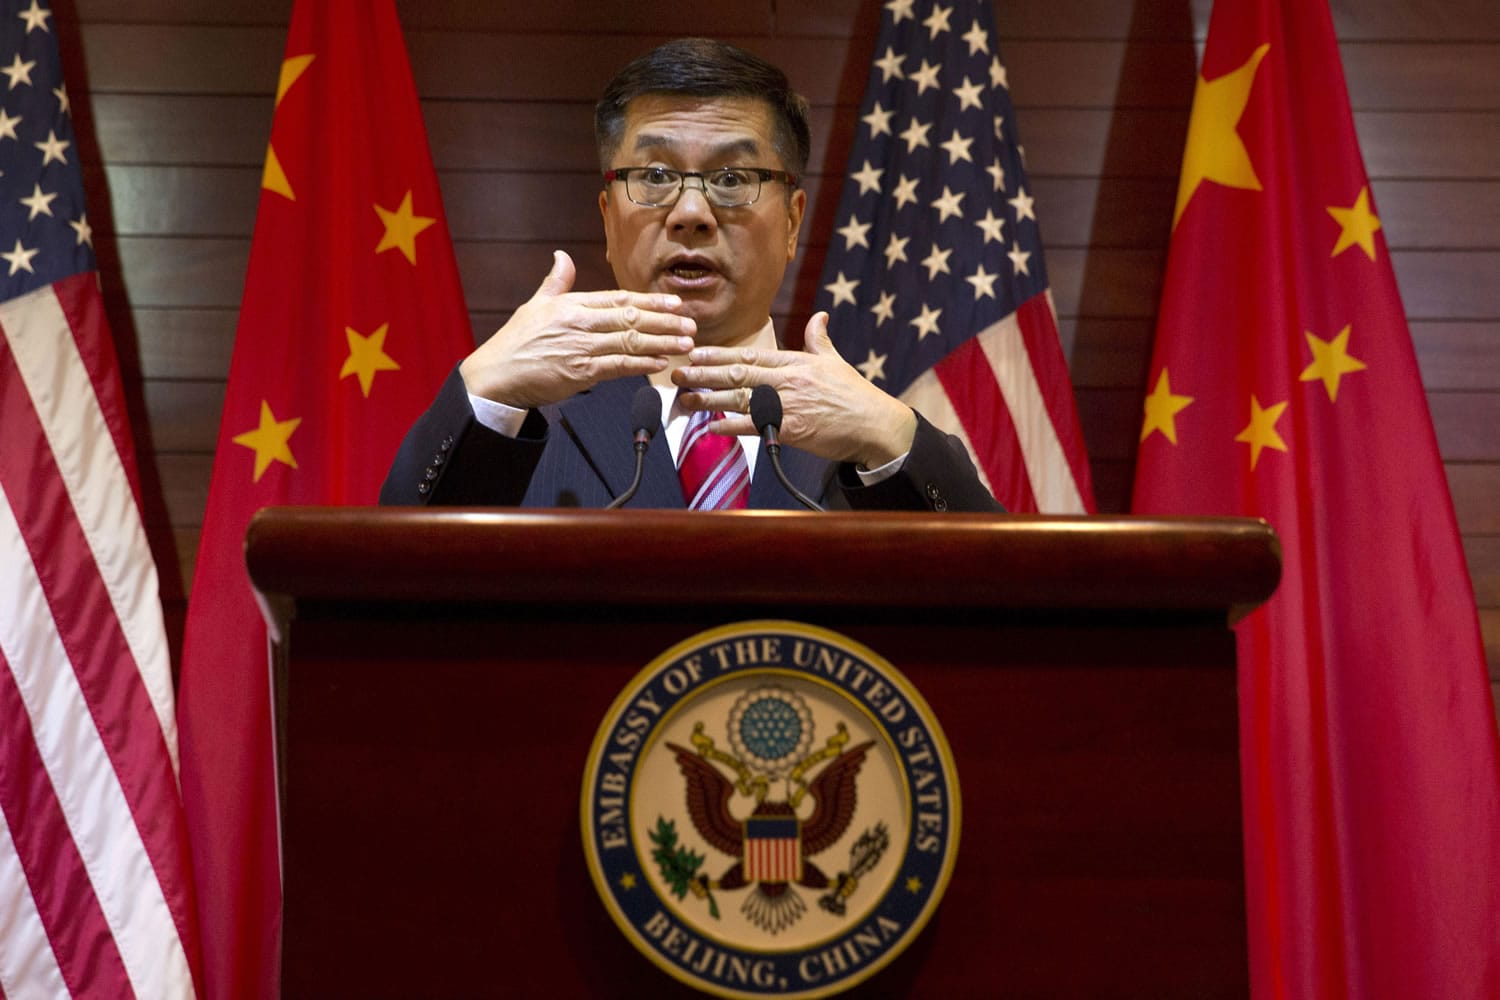 Gary Locke, outgoing U.S. ambassador to China, speaks during a farewell press conference held at the U.S.